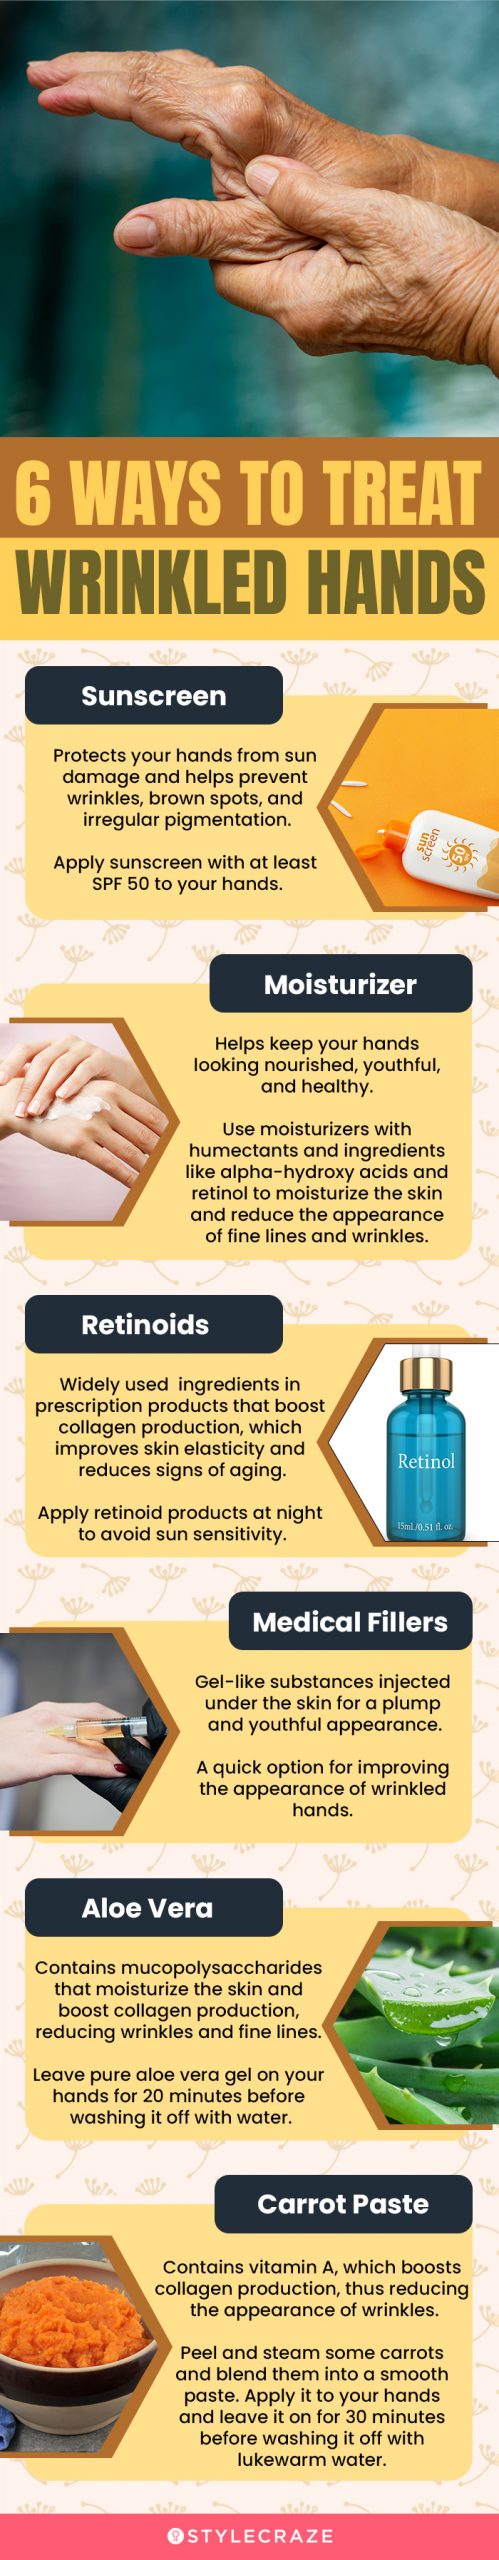 6 Home Remedies For Wrinkles: Causes and Treatments - Blog